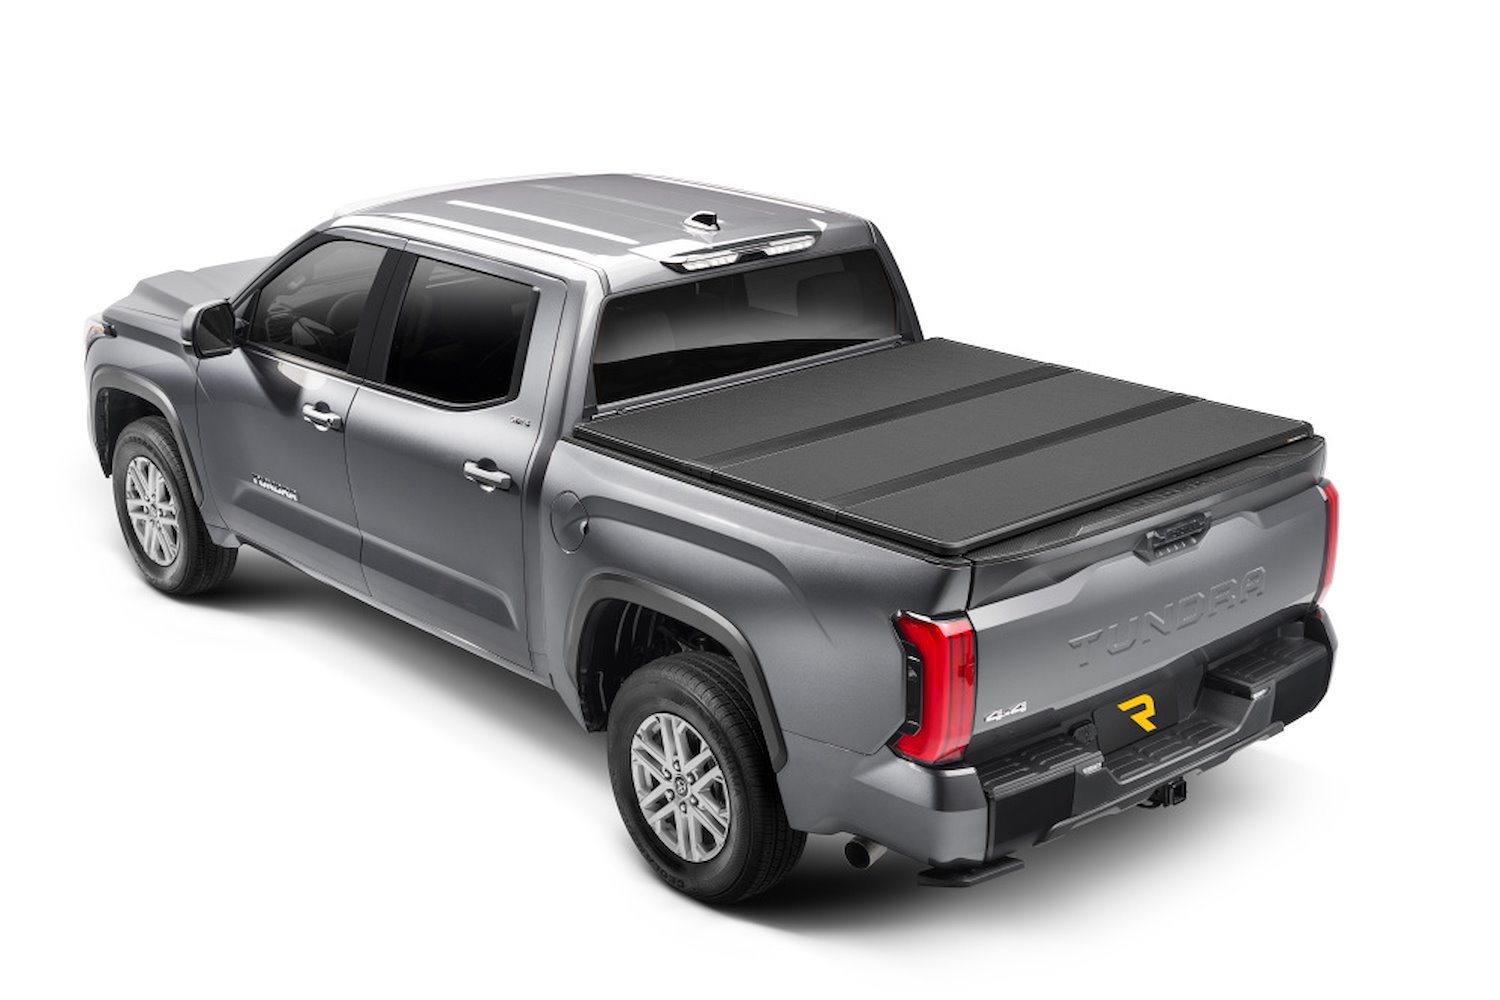 88471 Solid Fold ALX Tonneau Cover for 14-21 Tundra 8 ft.2 in. w/ Deck Rail System